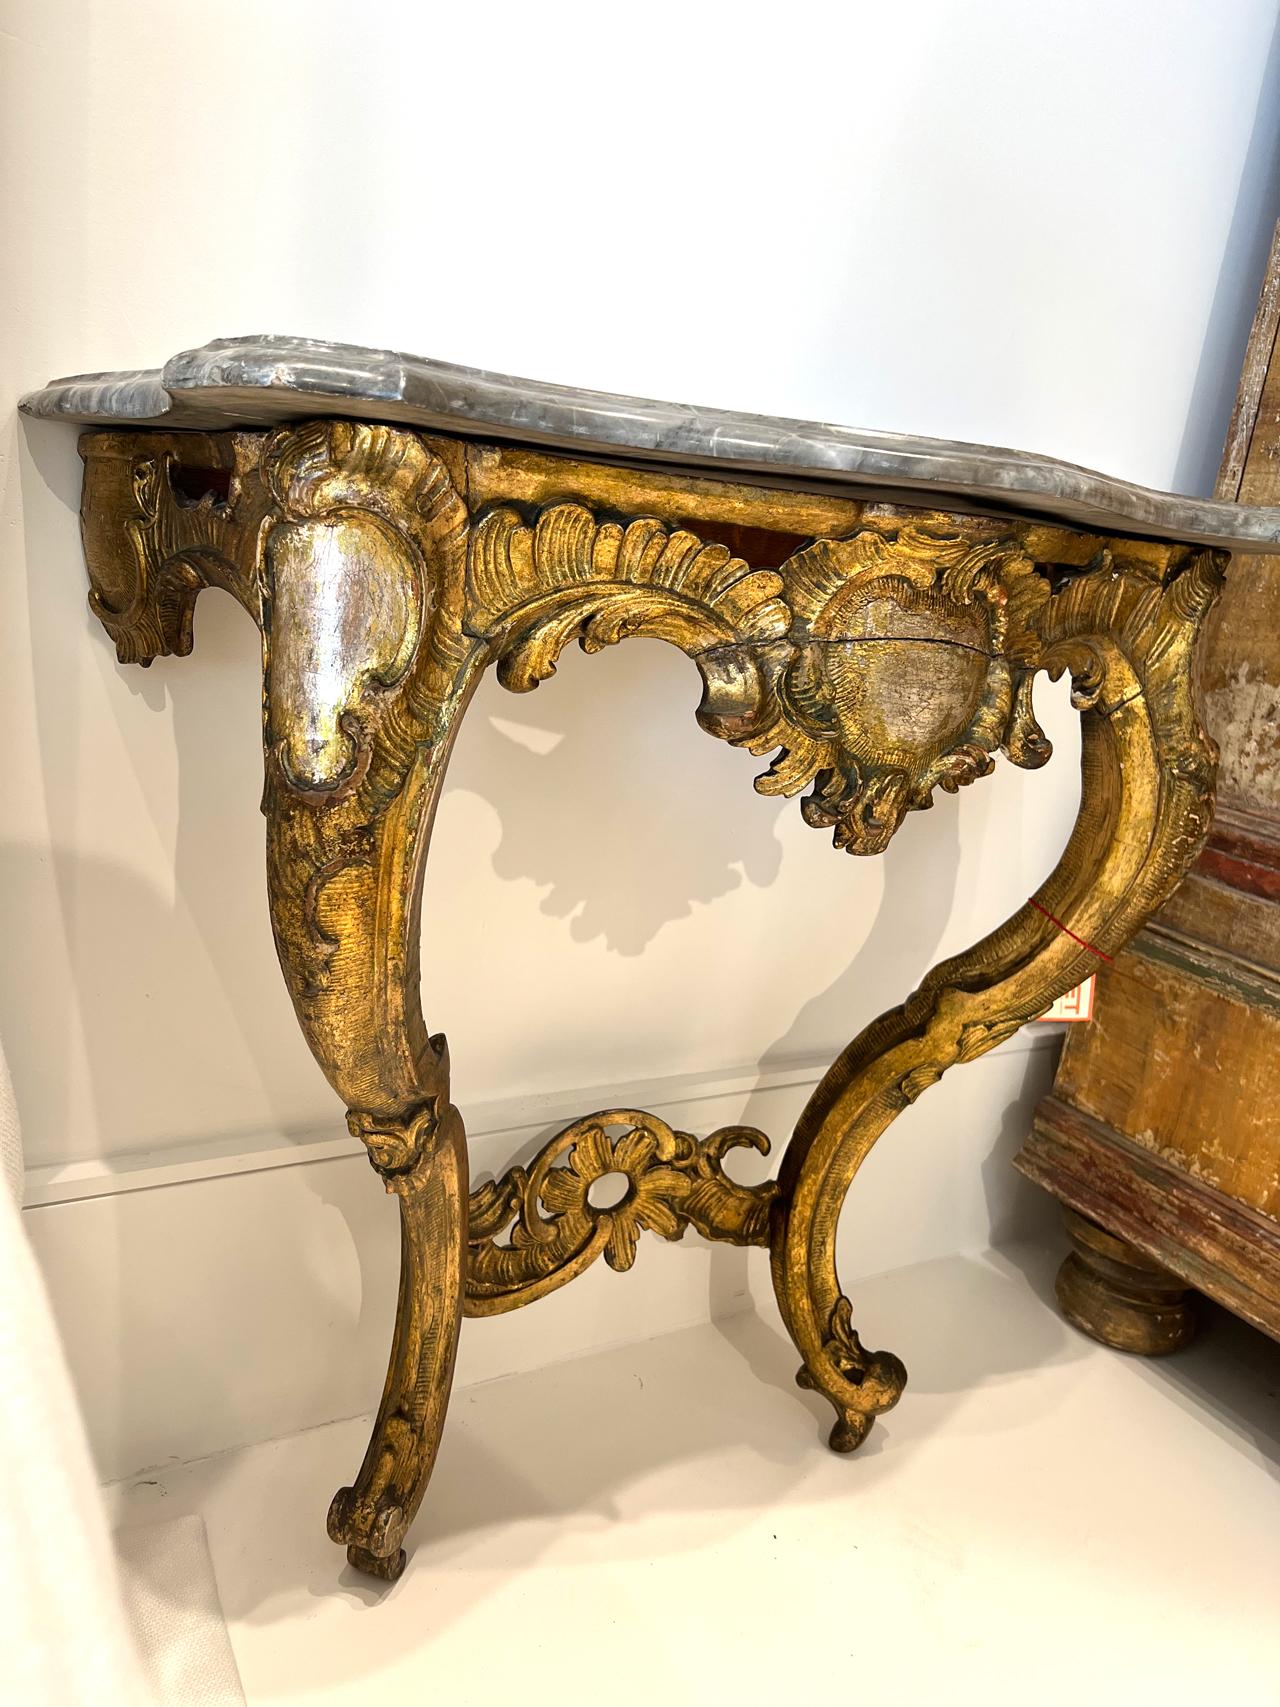 18th century Italian console with grey marble top. Gilded base and marble top console with cartouche carving in center and cabriole legs bring instant grace and beauty in a living room or bedside.